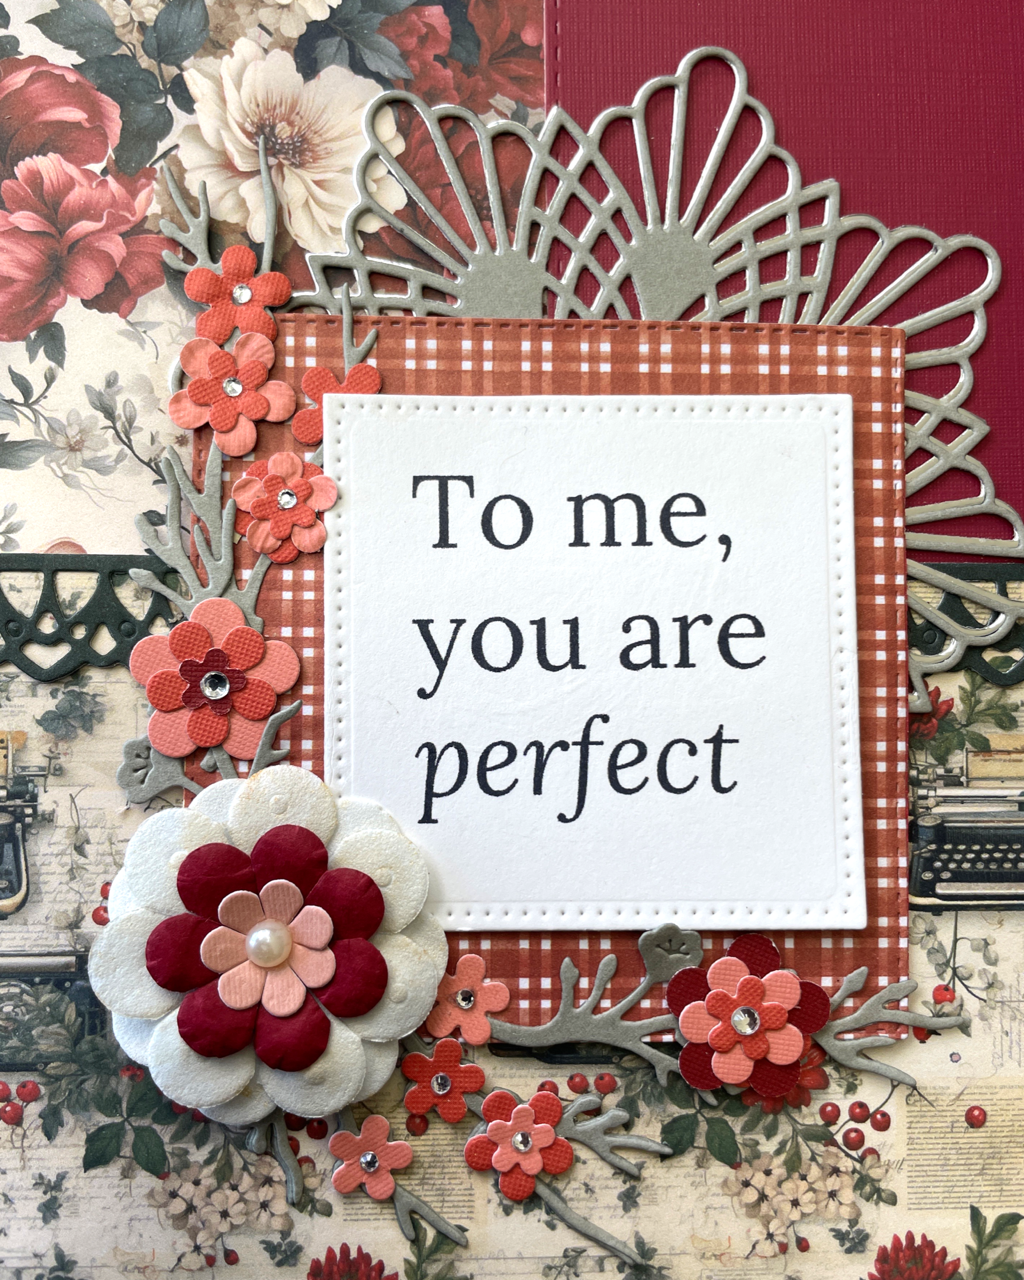 To me, you are perfect